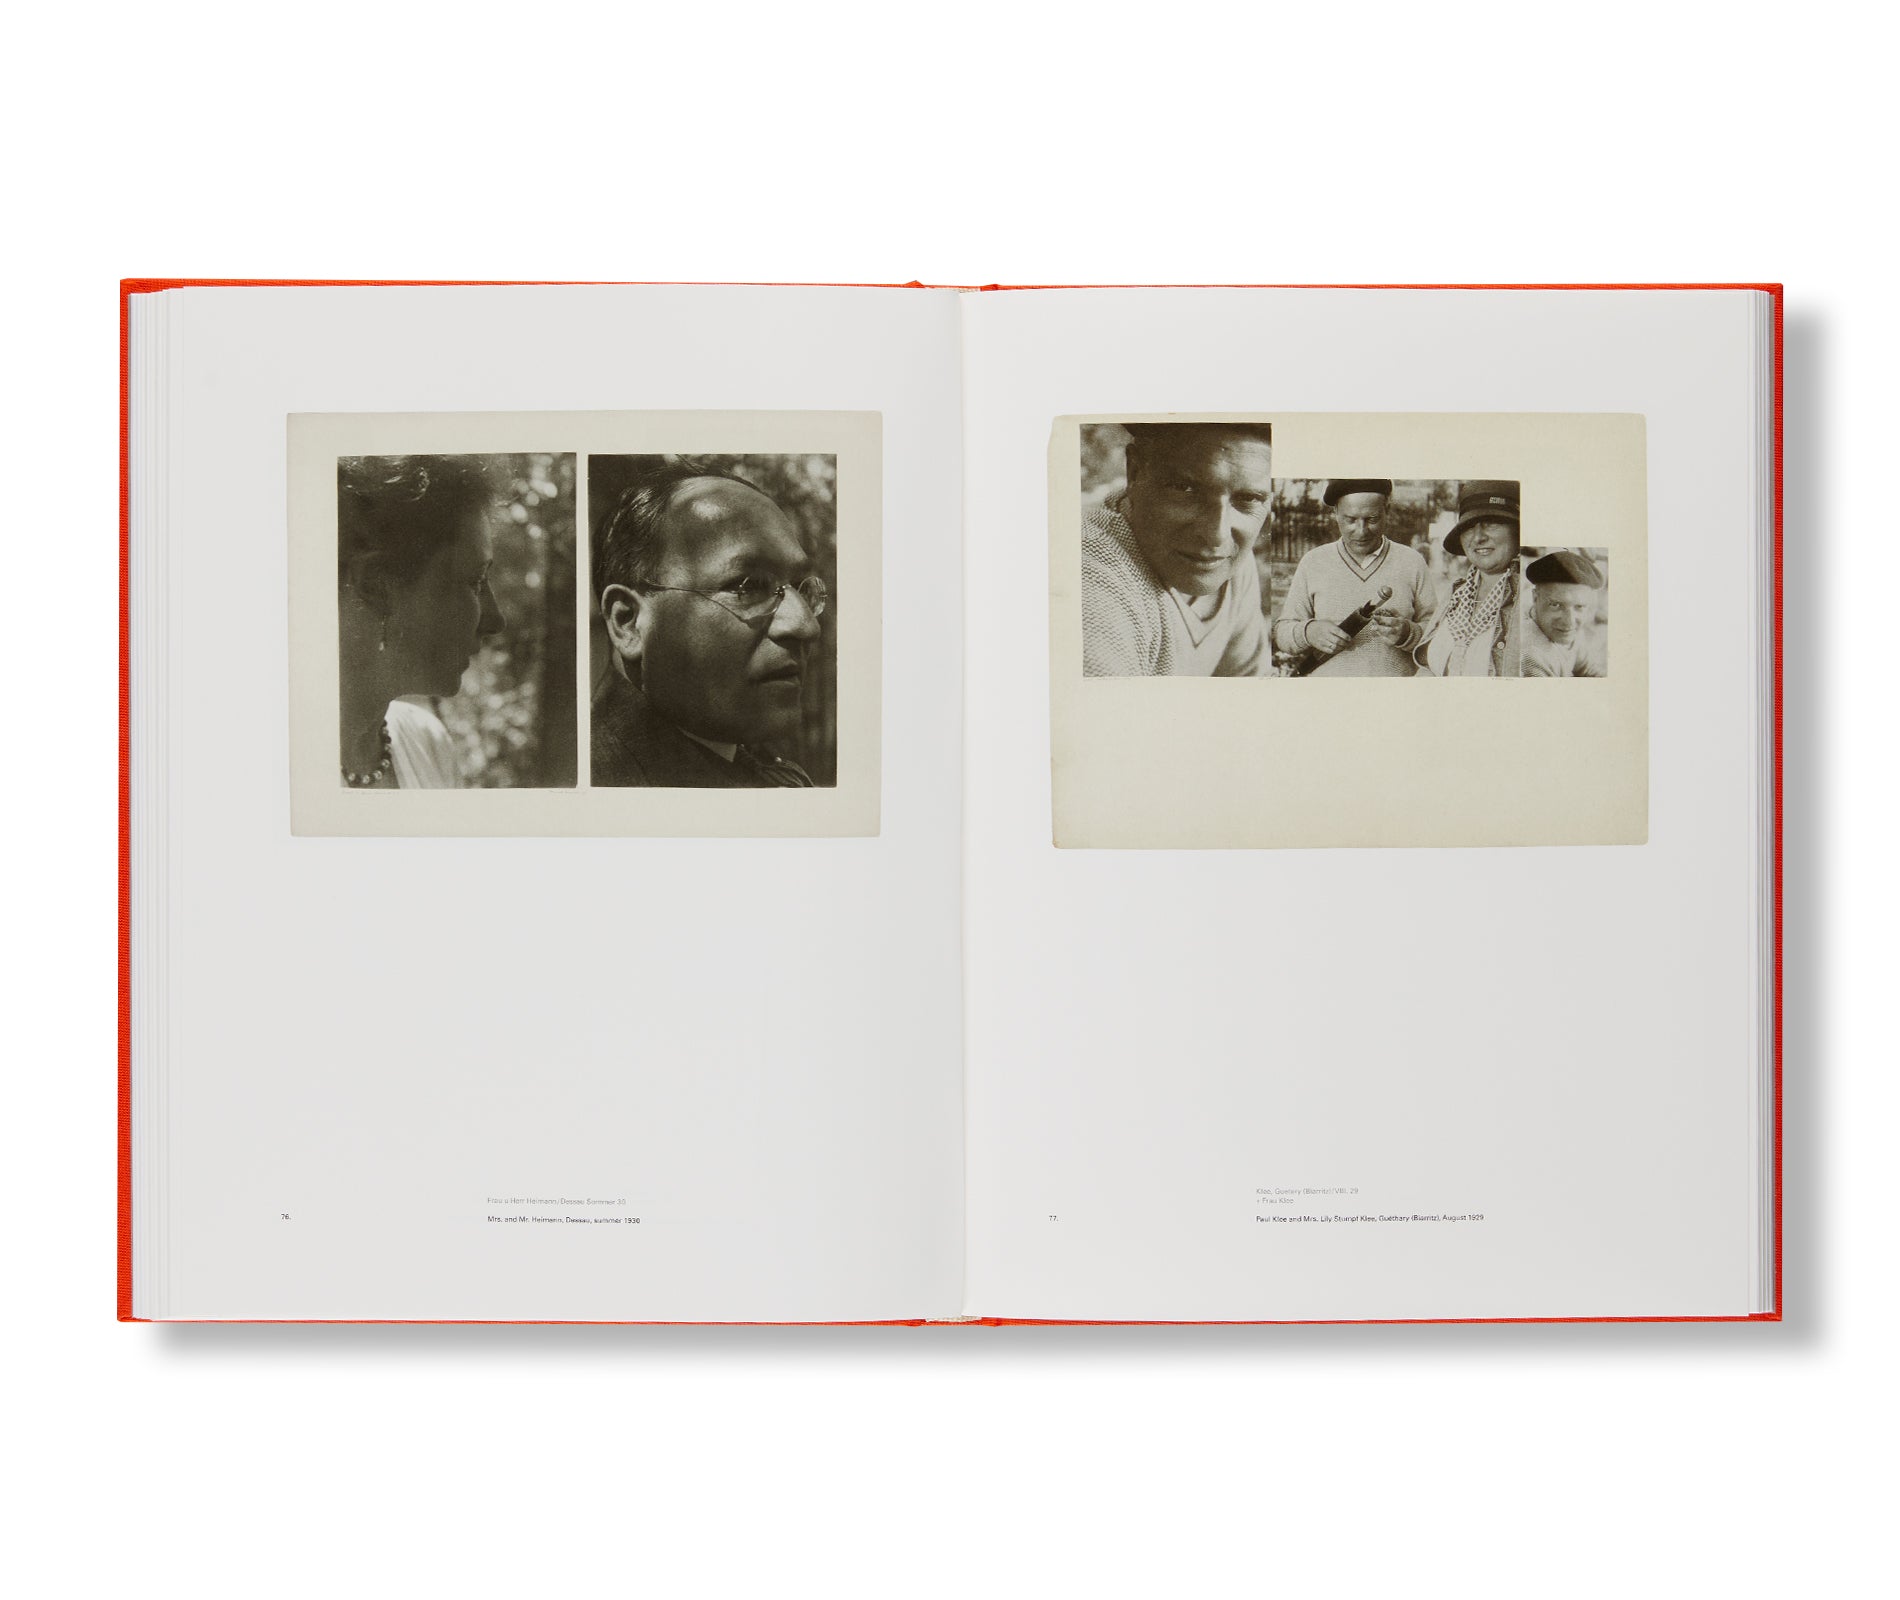 ONE AND ONE IS FOUR: THE BAUHAUS PHOTOCOLLAGES OF JOSEF ALBERS by Josef Albers